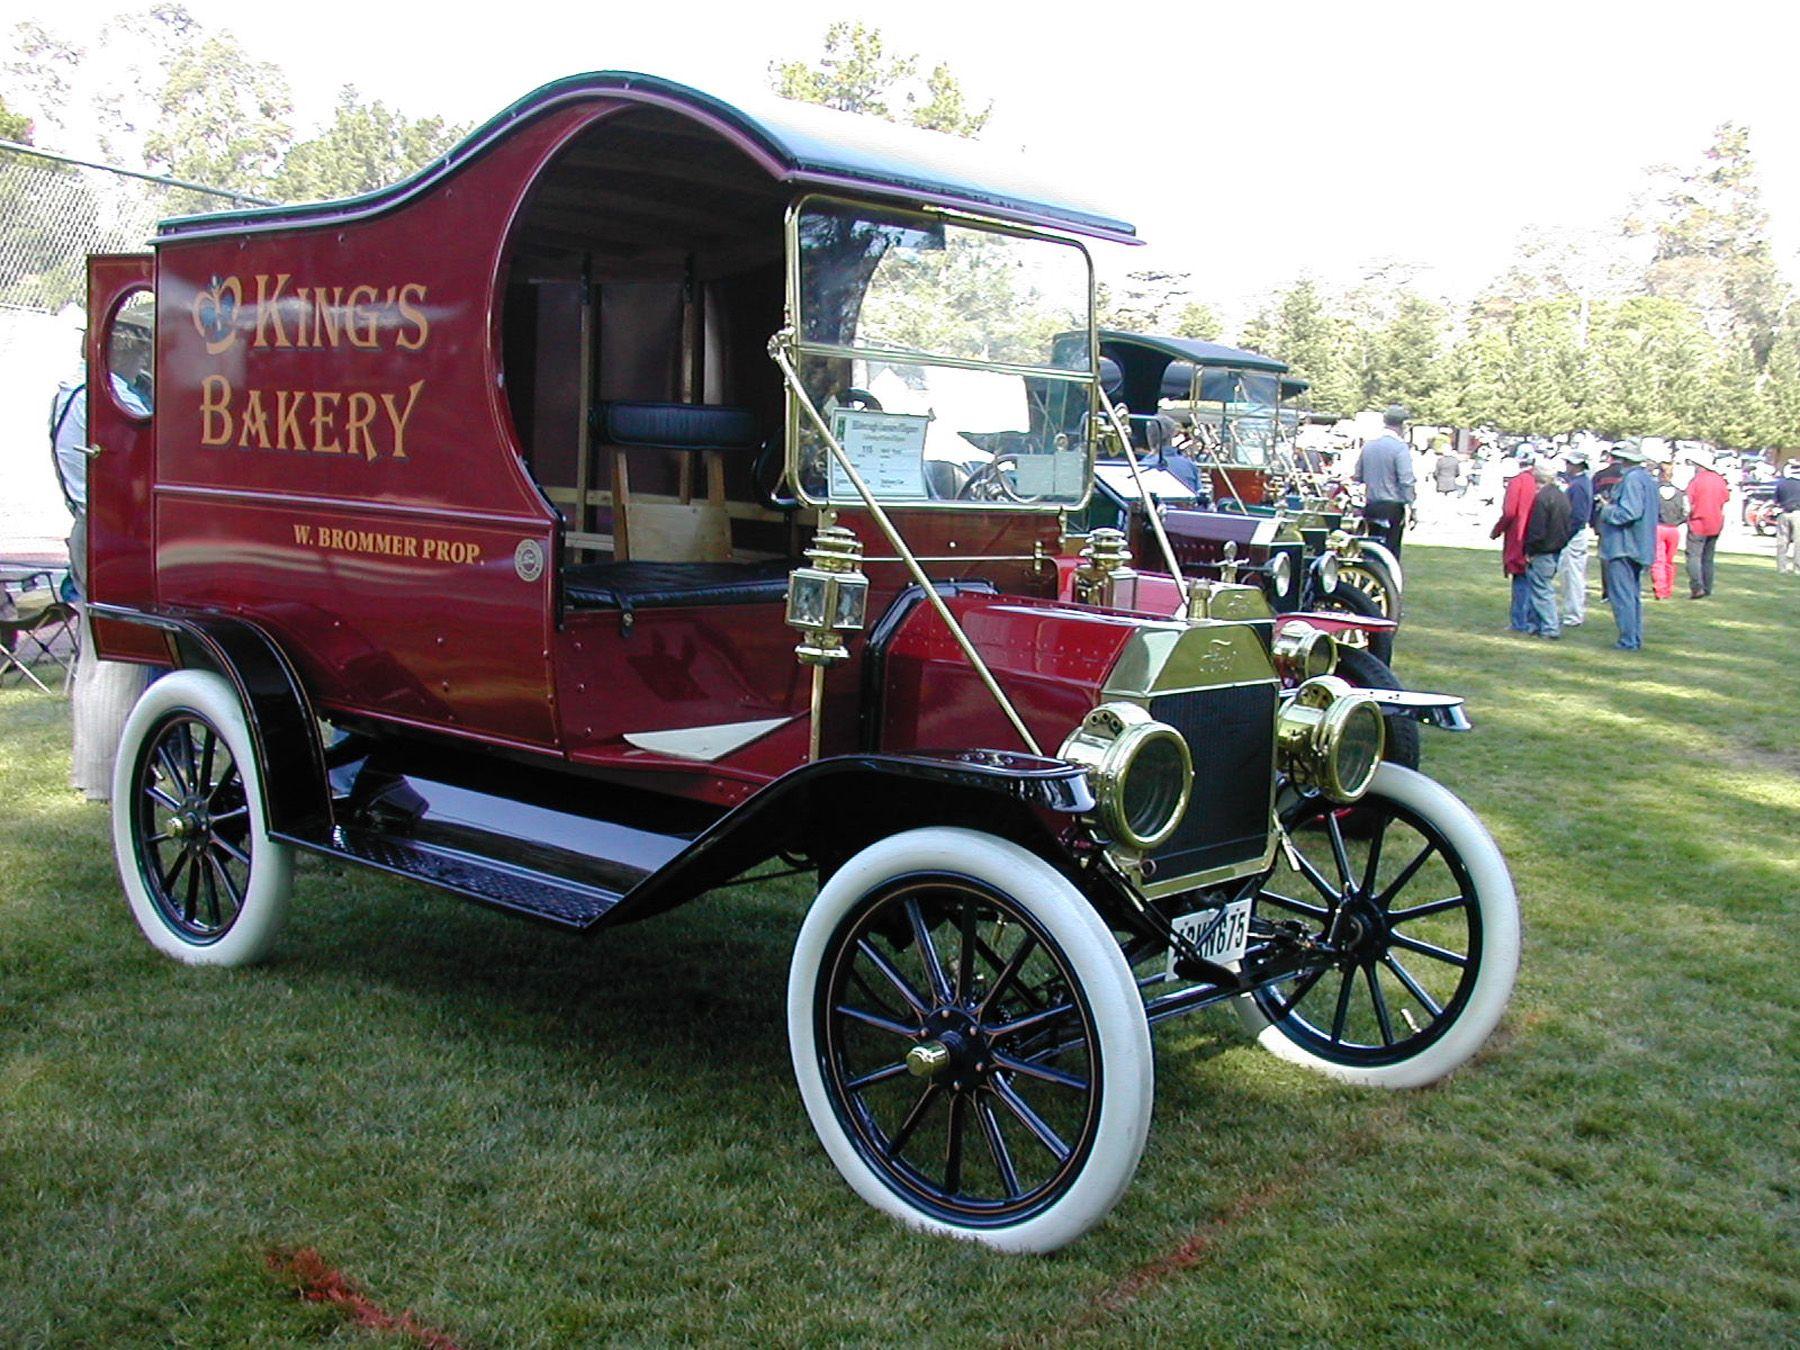 Model T Ford Logo - Grandfather's Bakery Logo on 1912 Model T -- Tribute to Memory ...